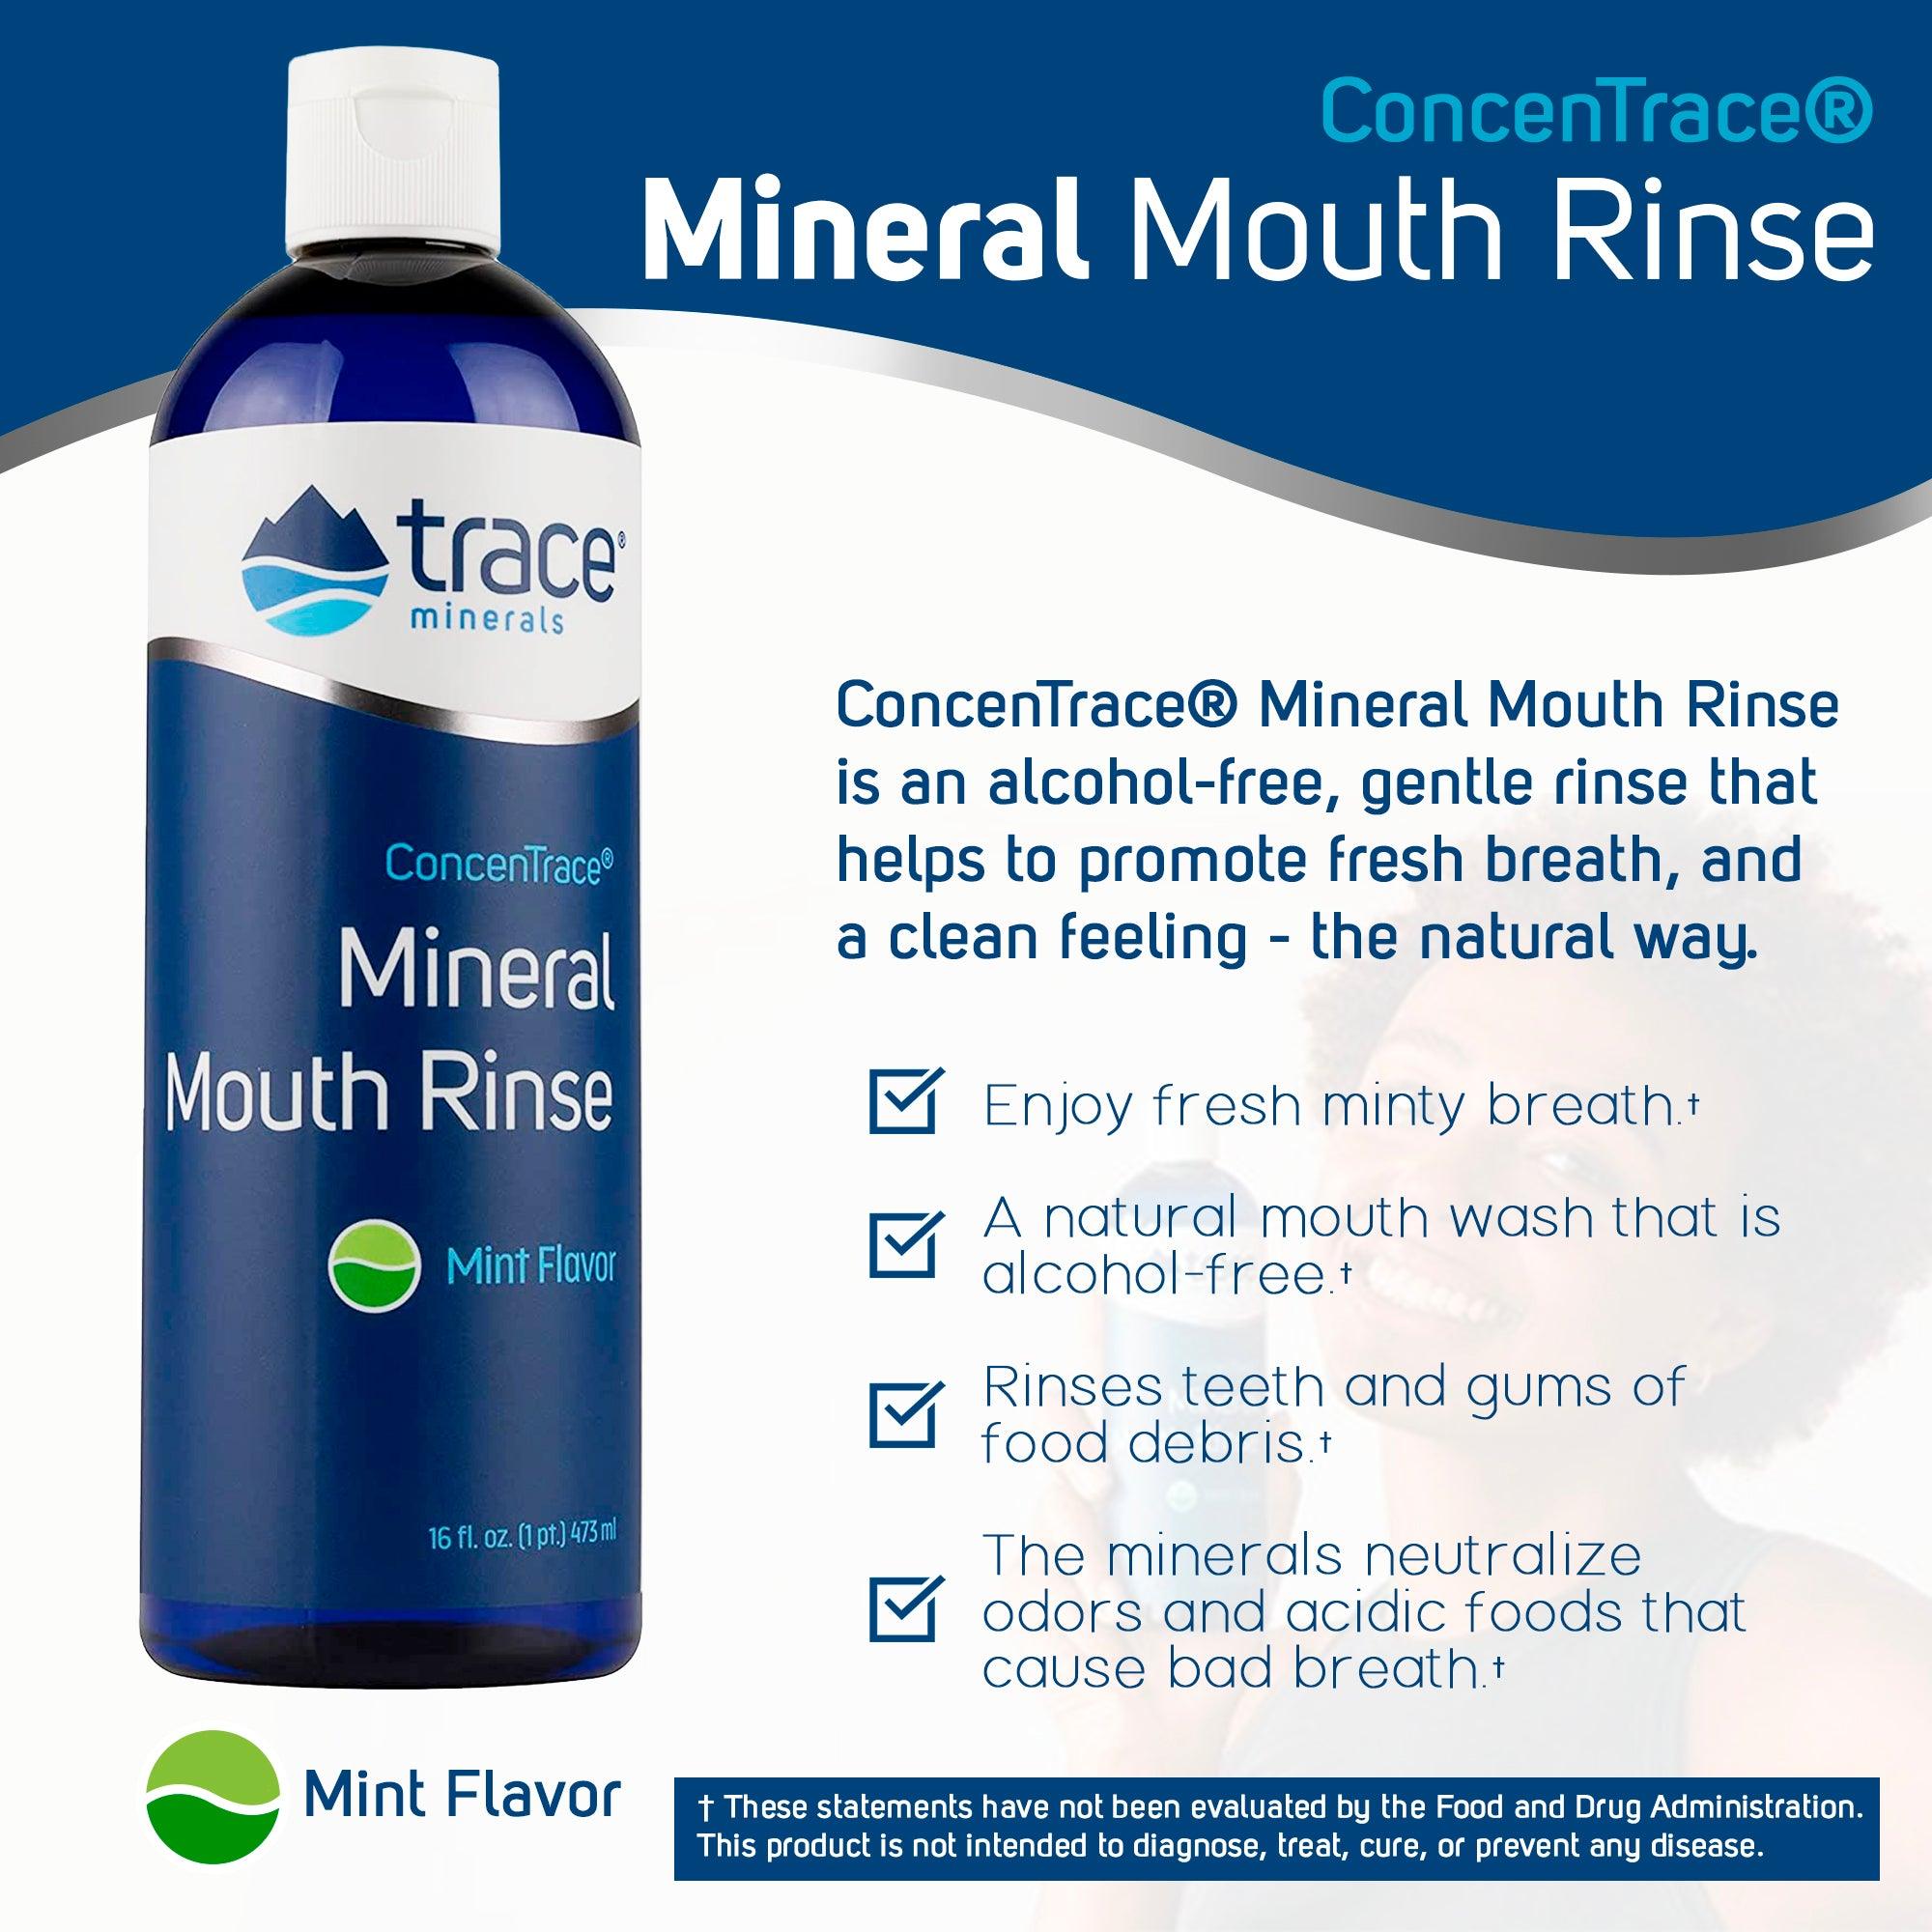 ConcenTrace Mineral Mouth Rinse - Trace Minerals